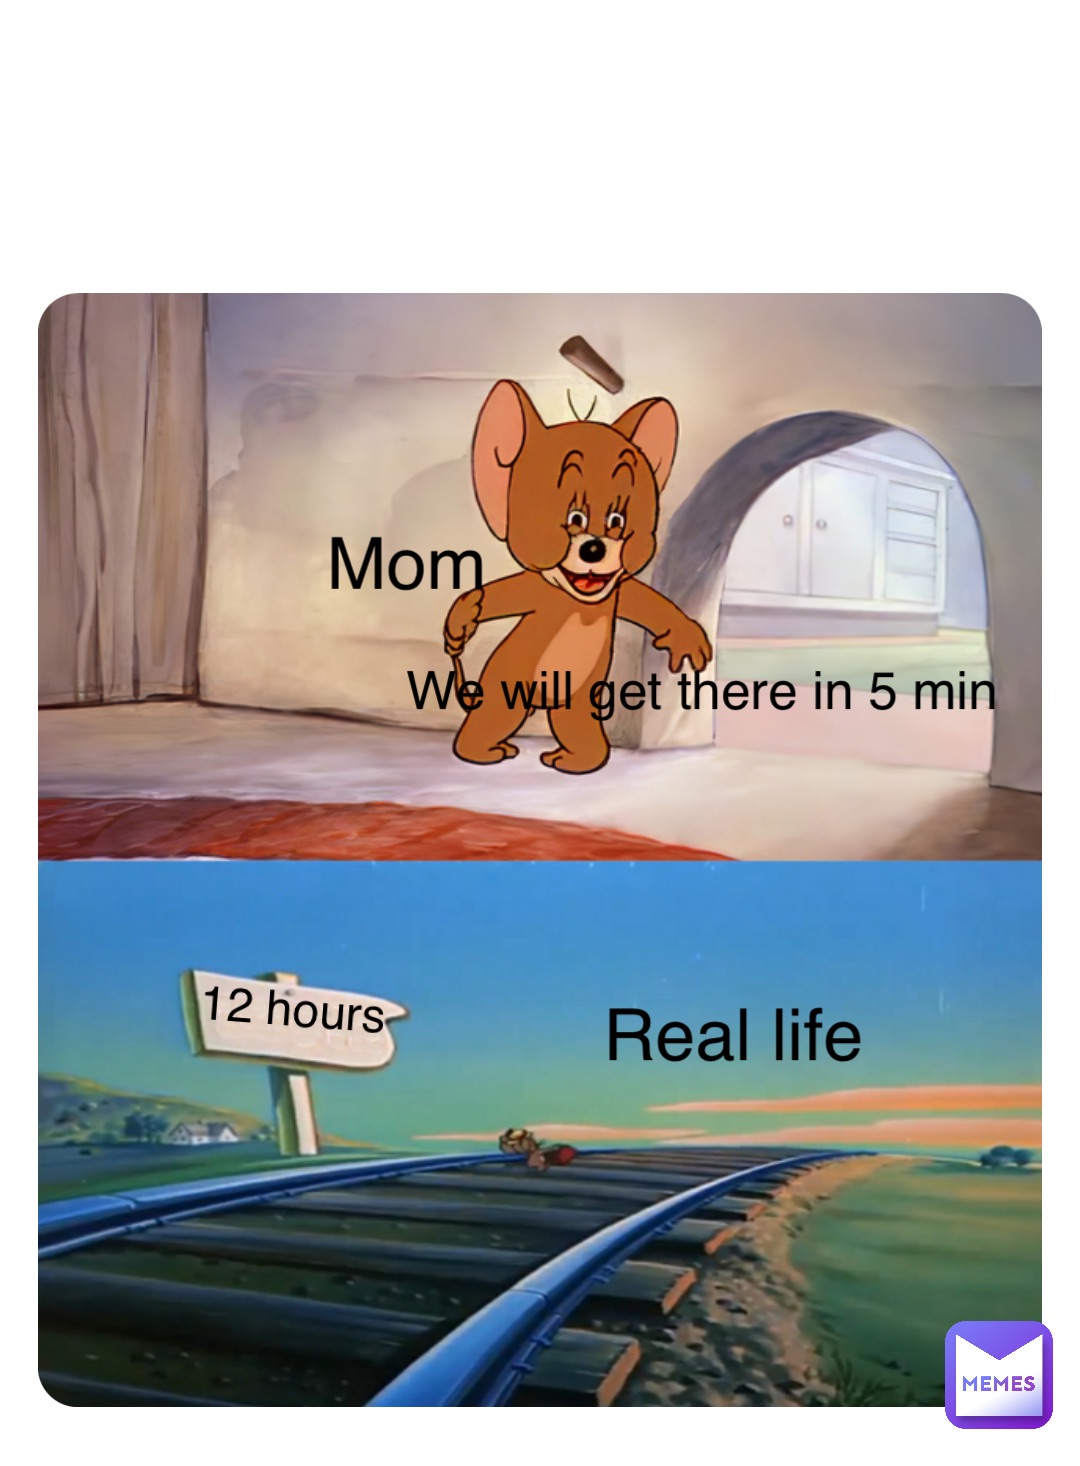 Double tap to edit Mom We will get there in 5 min 12 hours Real life